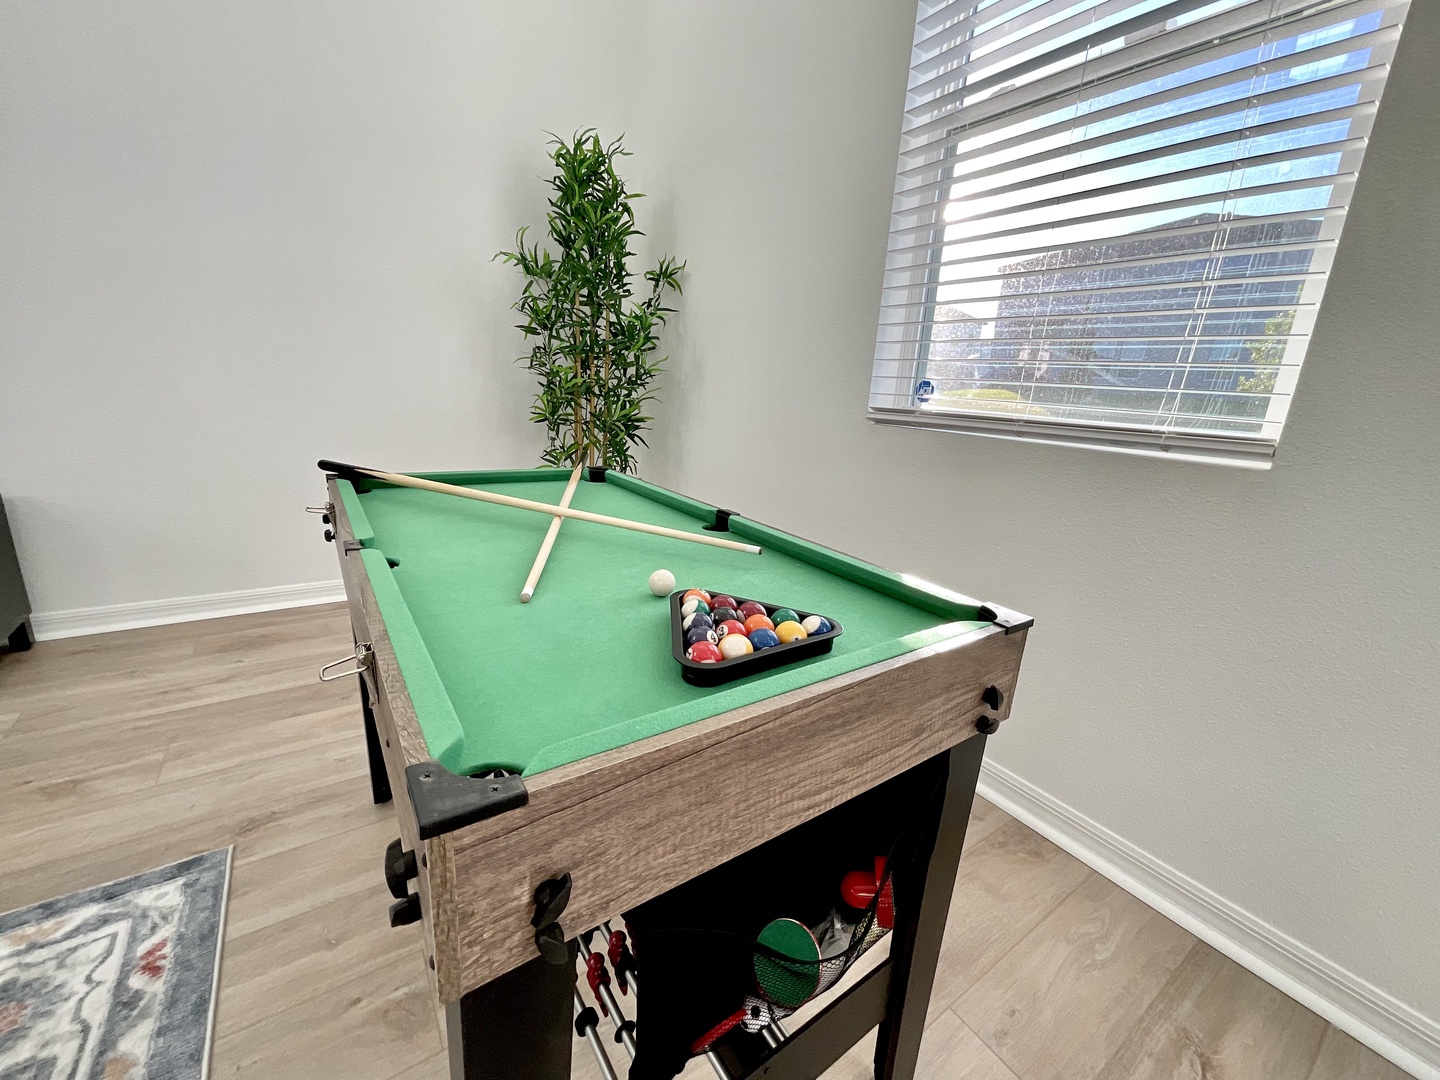 Get competitive with a round of pool or foosball in the living room!